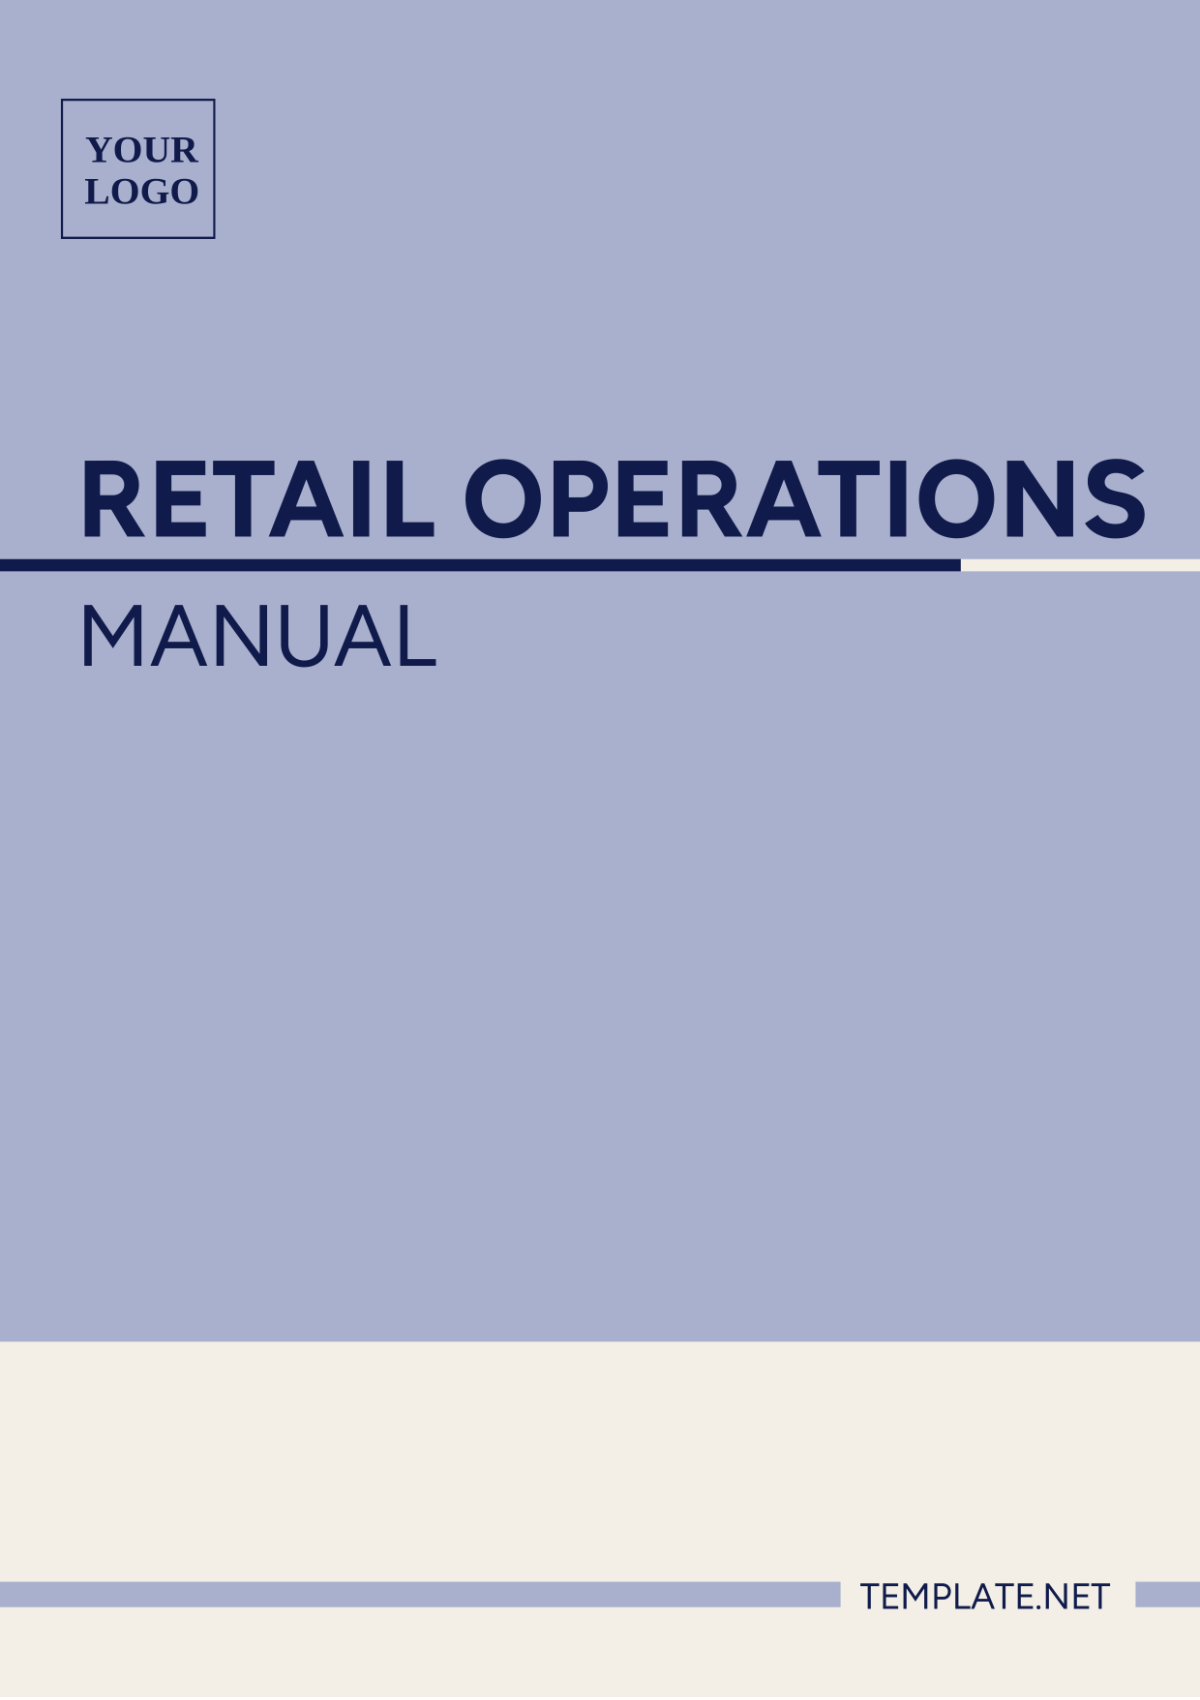 Retail Operations Manual Template